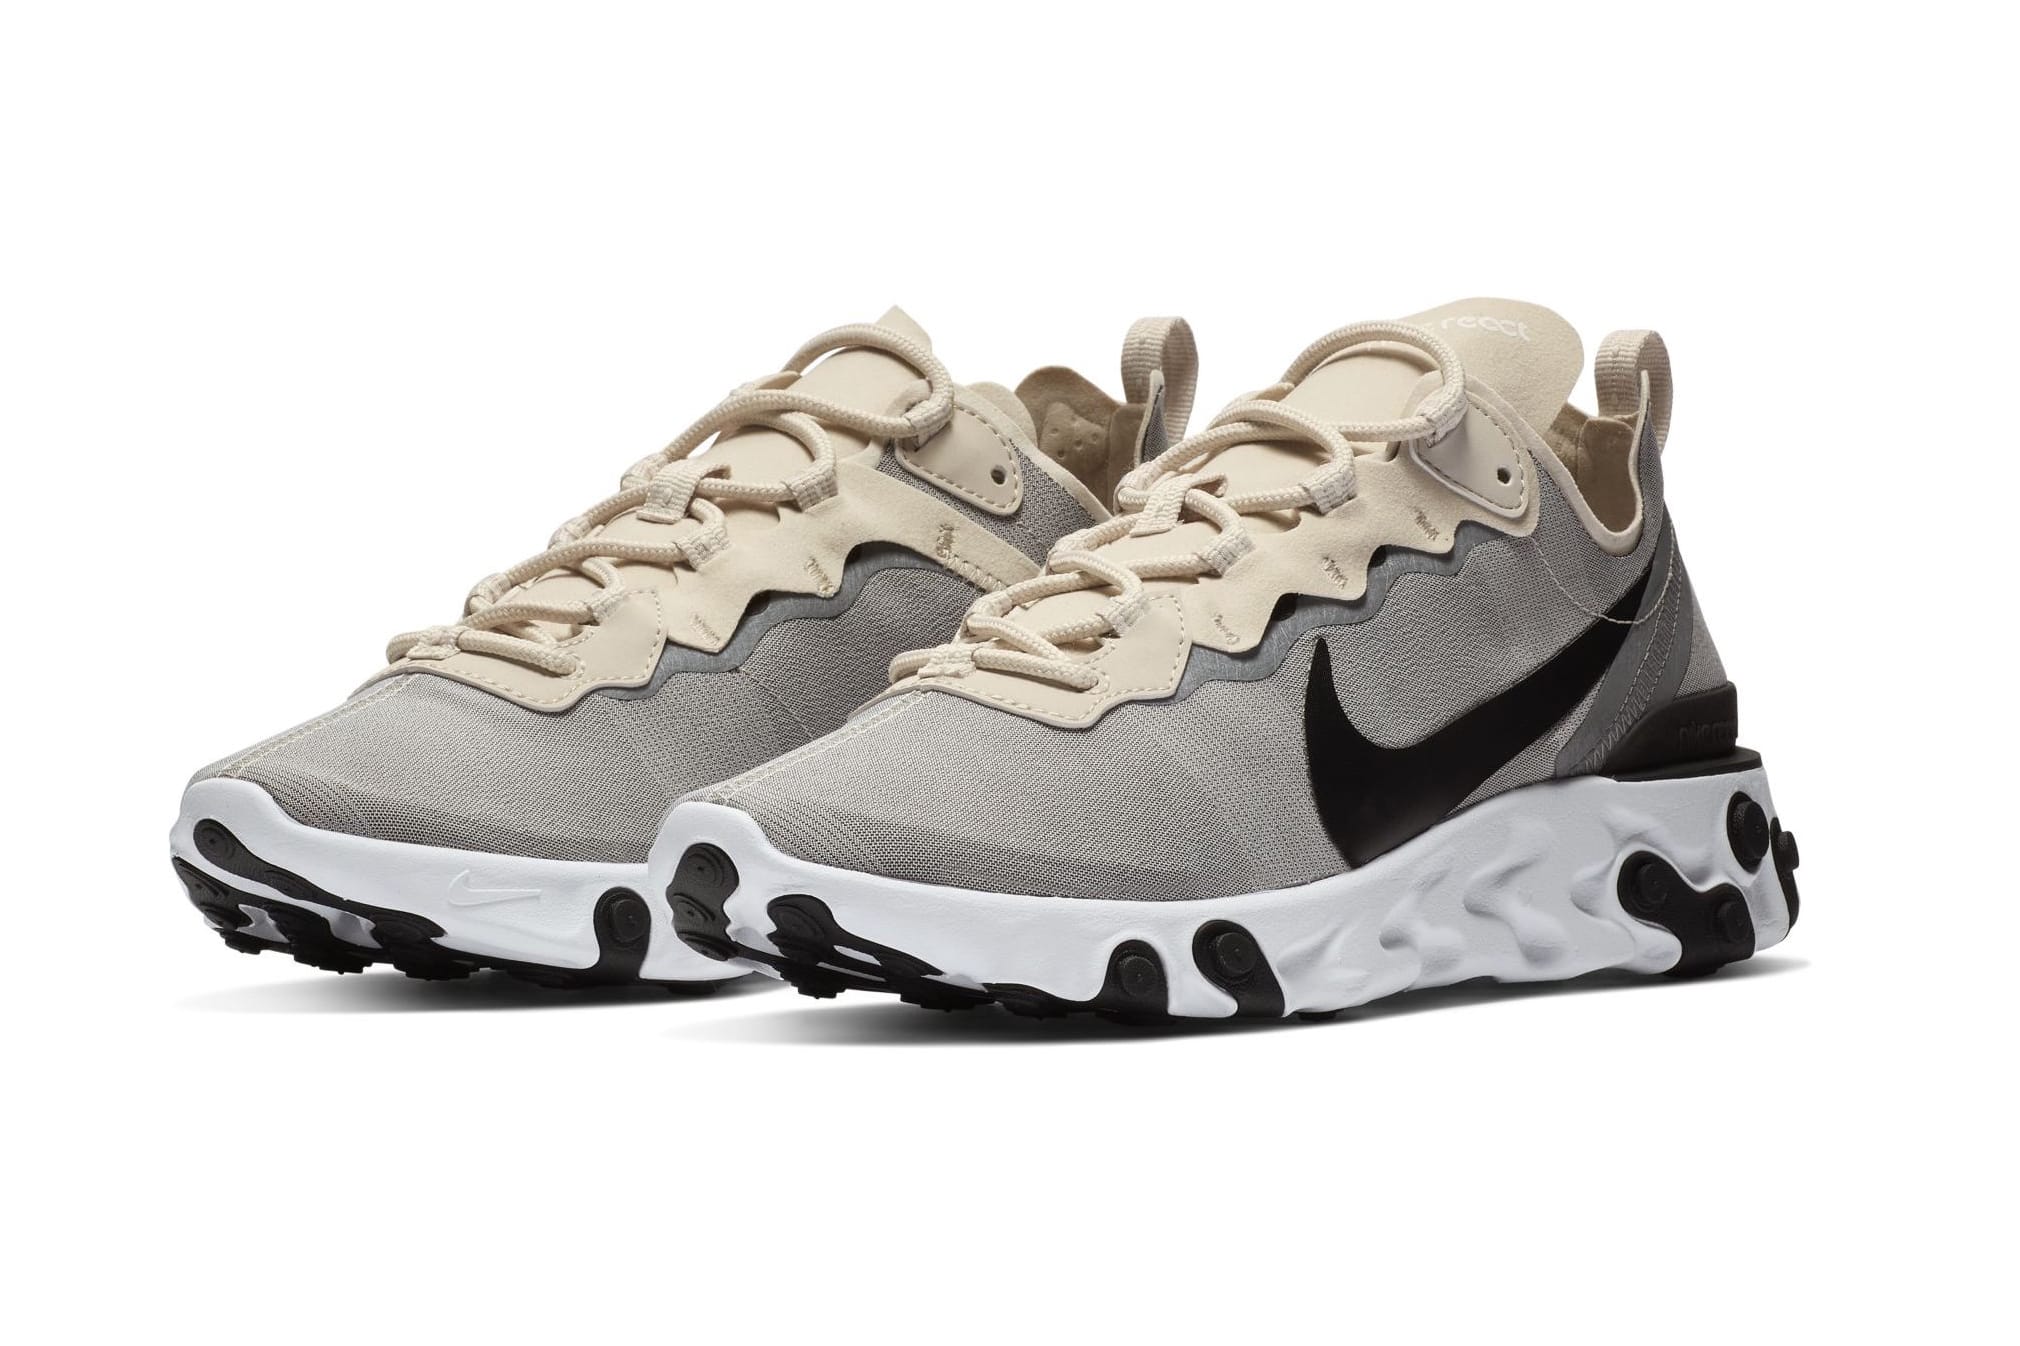 Nike React Element 55 Goes Neutral in 